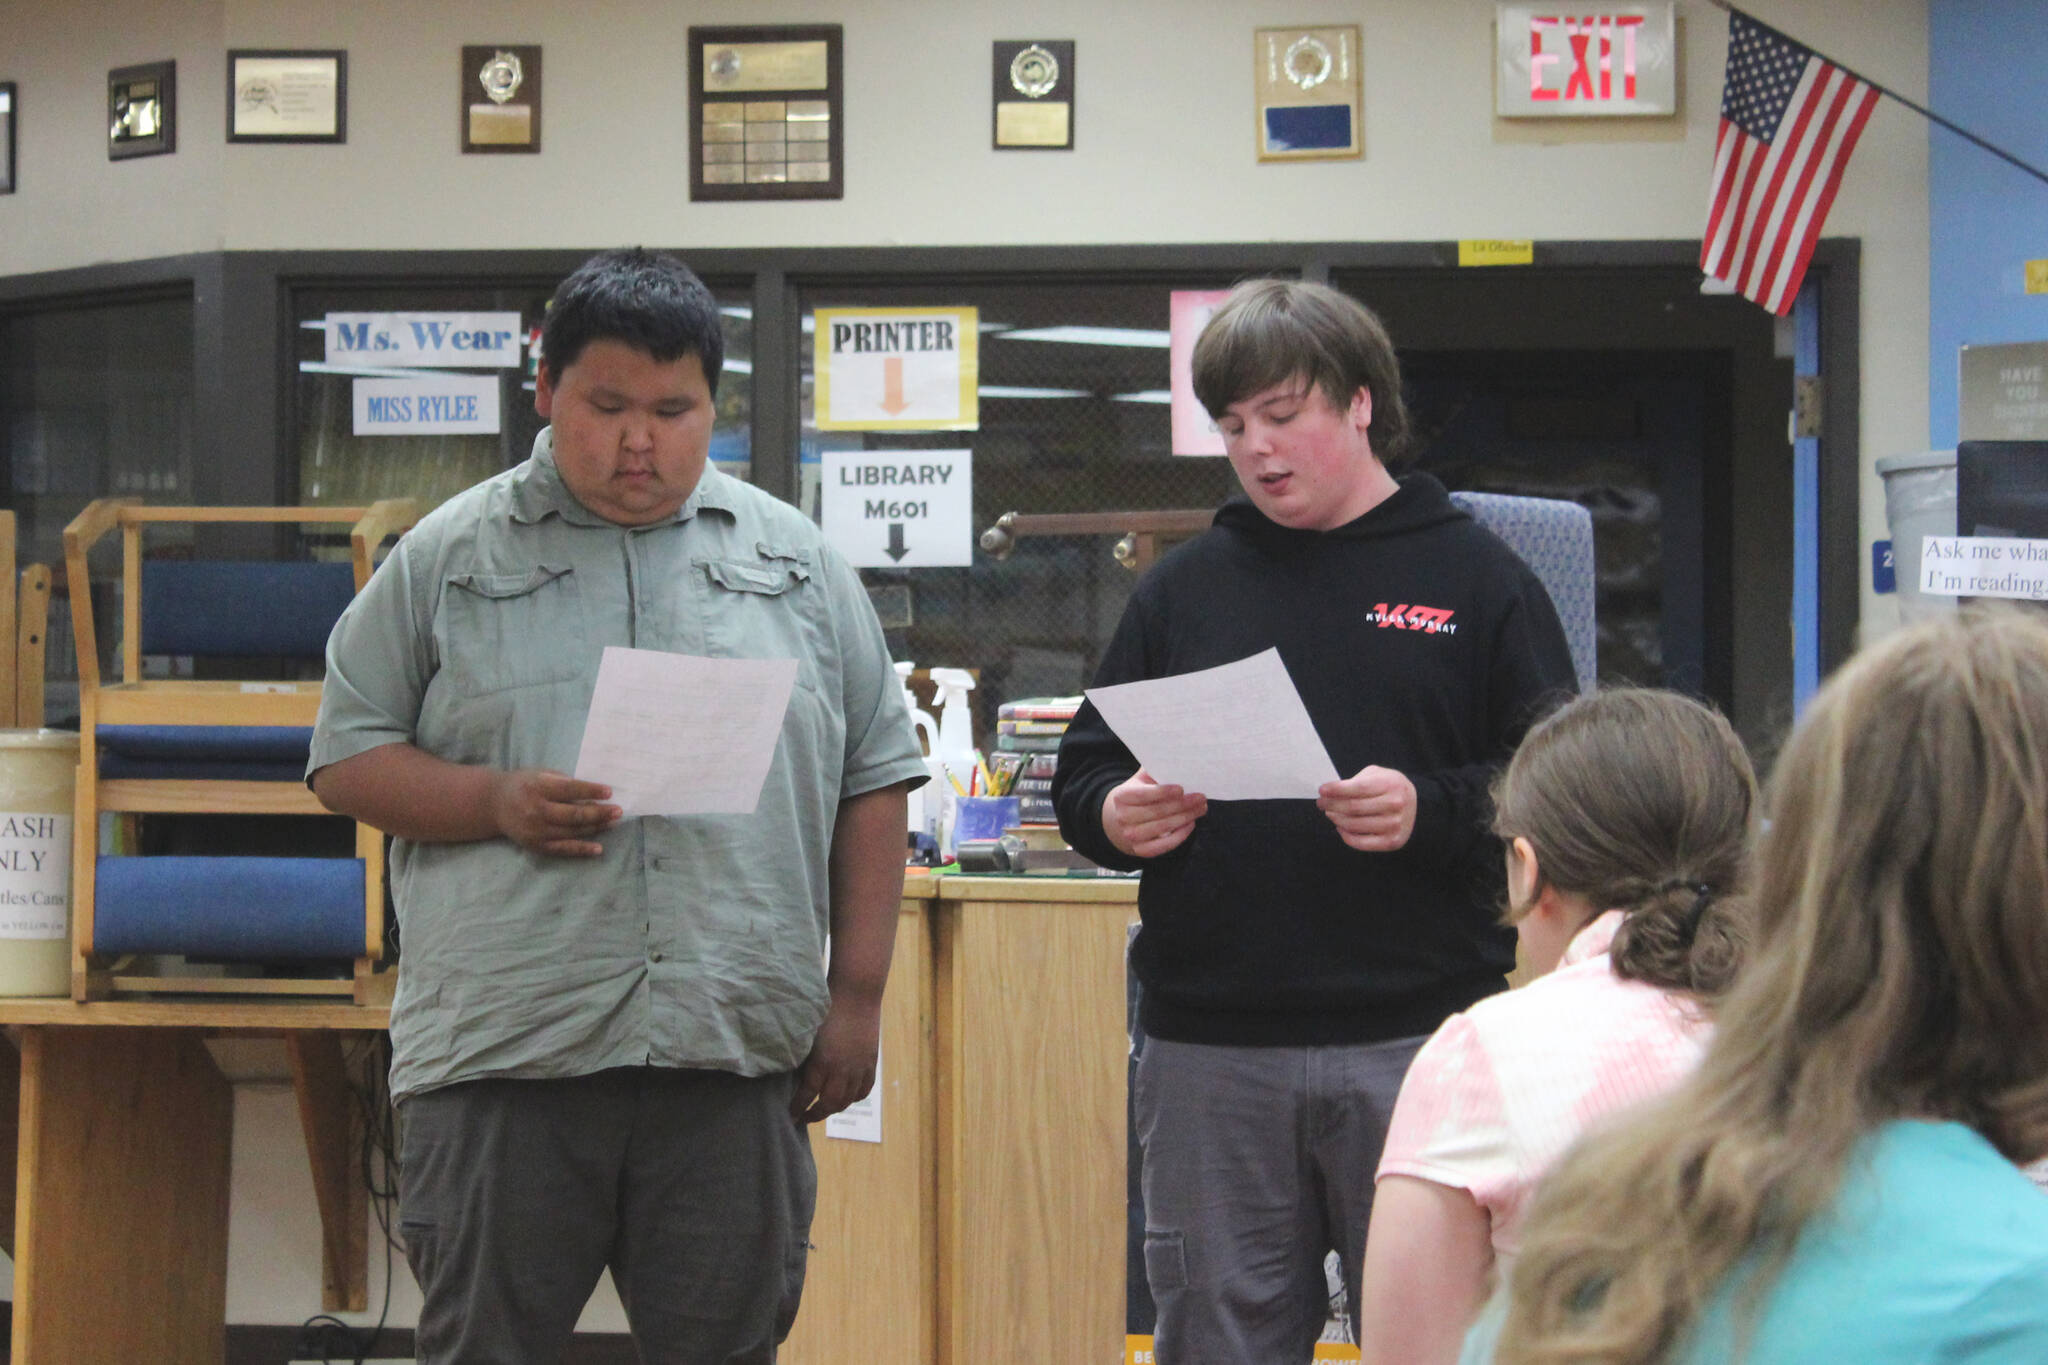 Jacob Wohlers, left, and Bryce LeFevre talk about their experience participating in KPBSD’s Summer Work Program during a program celebration in the Soldotna High School library on Tuesday, June 28, 2022, in Soldotna, Alaska. (Ashlyn O’Hara/Peninsula Clarion)